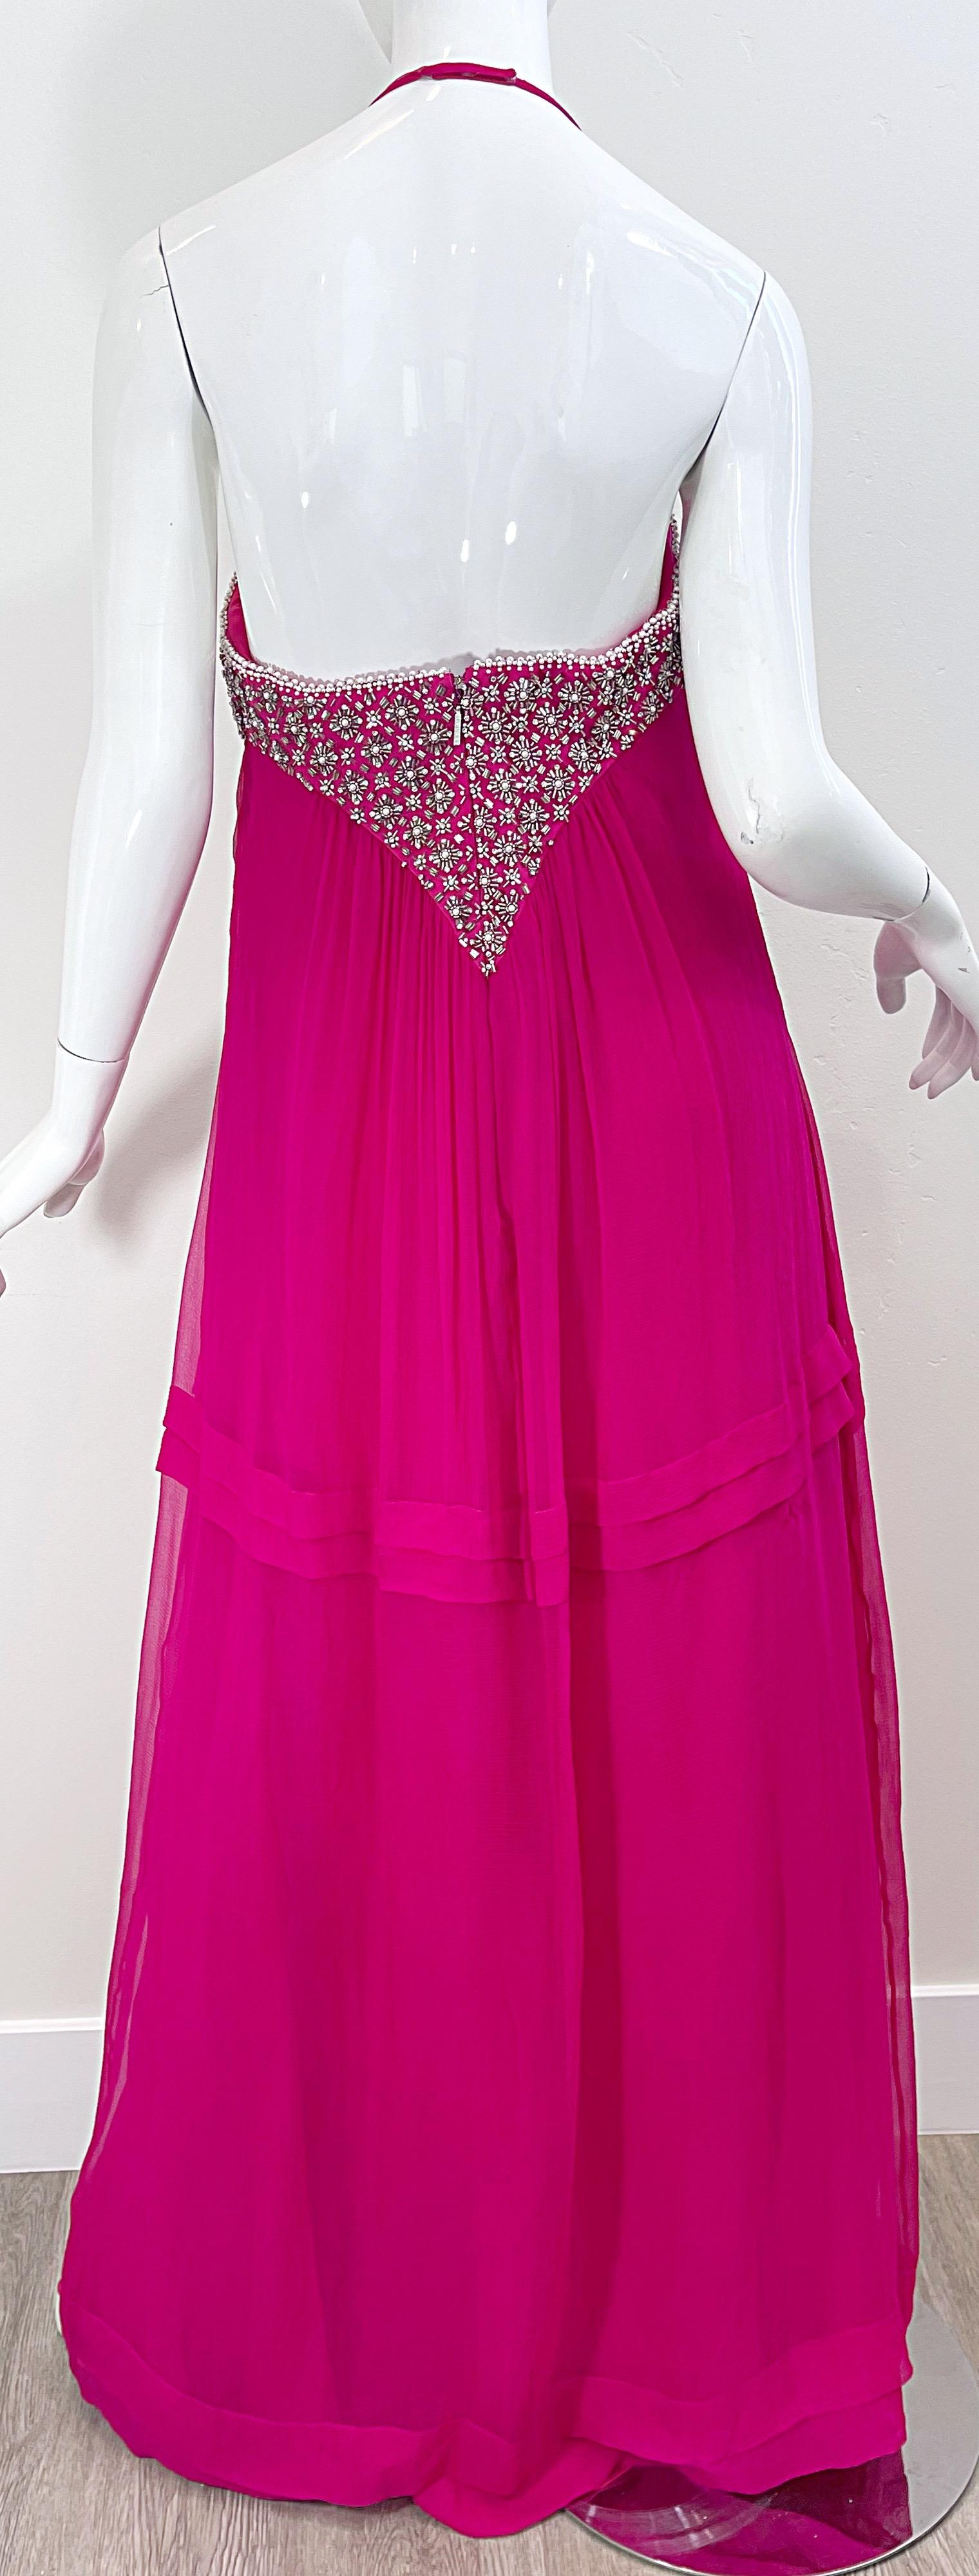 1990s Roberto Cavalli Size 44 / US 8 Hot Pink Chiffon Beaded Rhinestone 90s Gown For Sale 5